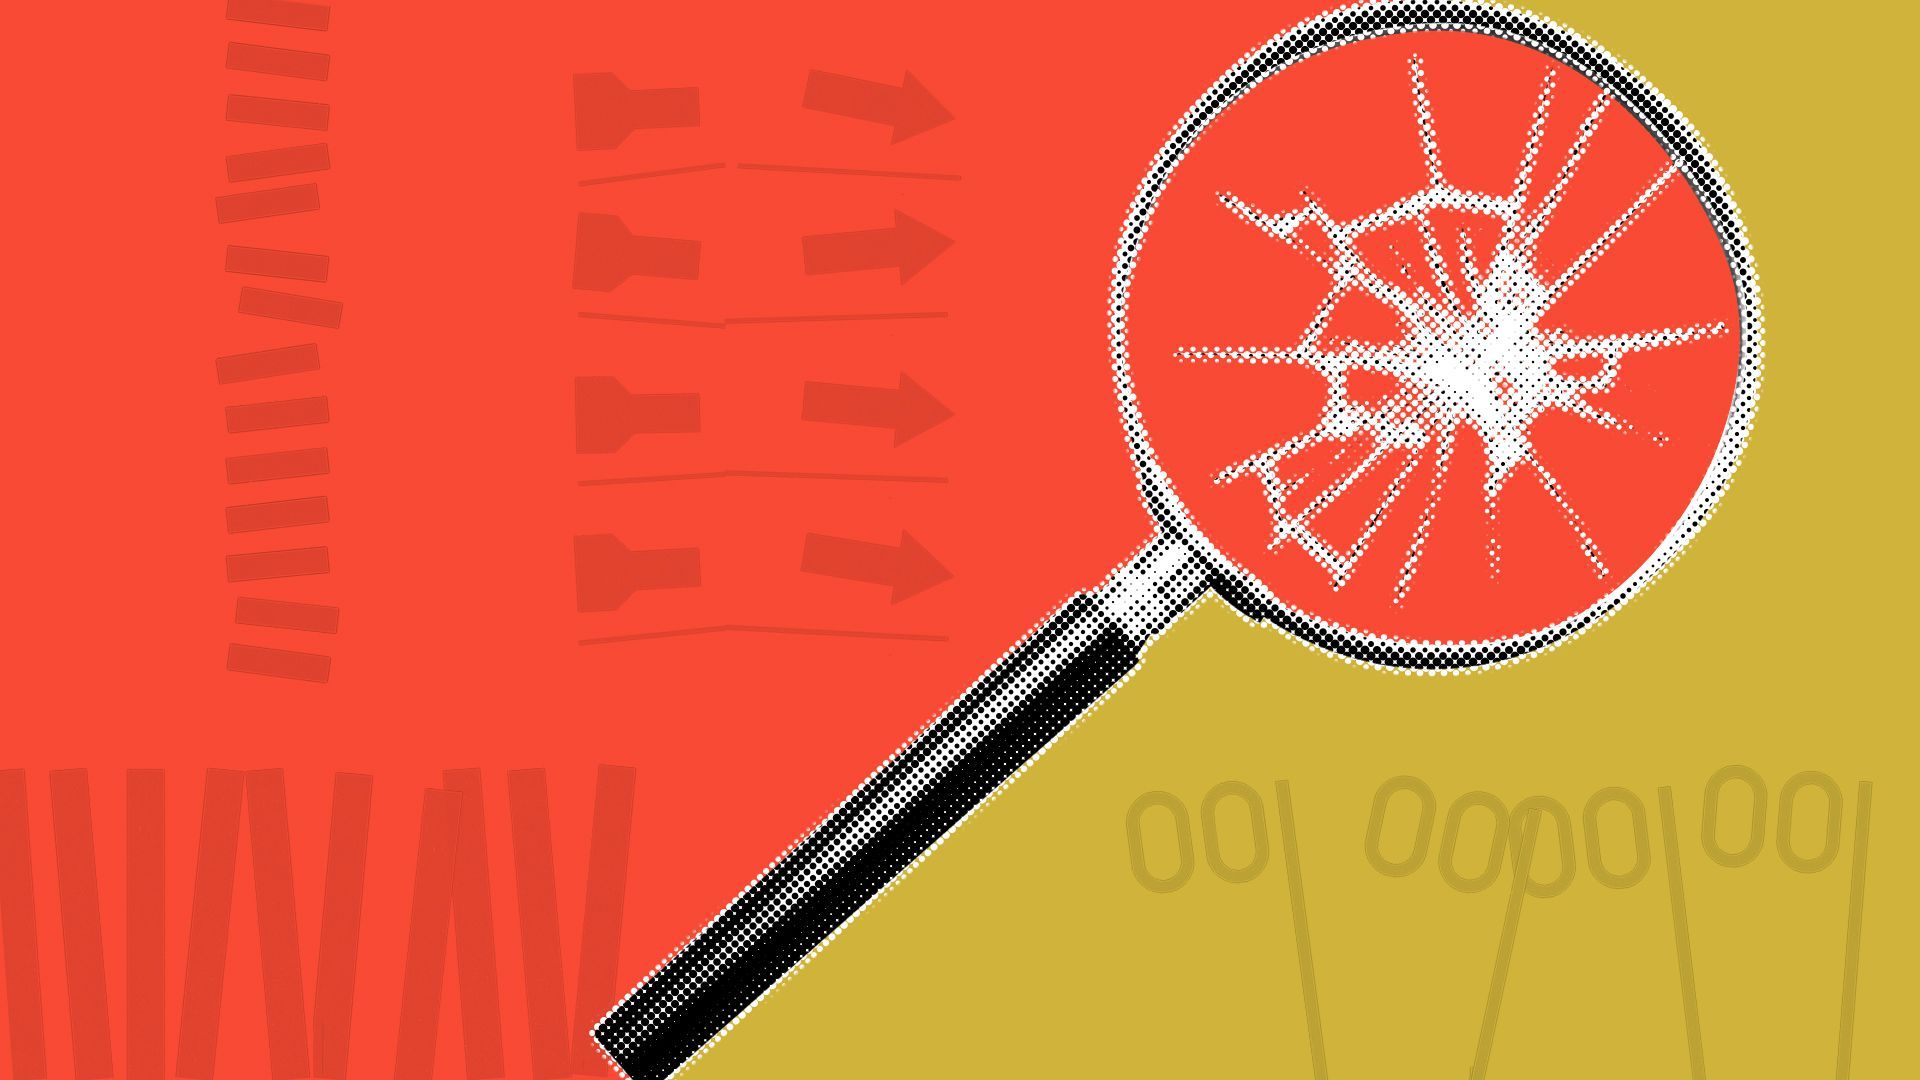 Illustration of a cracked magnifying glass over a divided red and gold background with broken ballot elements. 